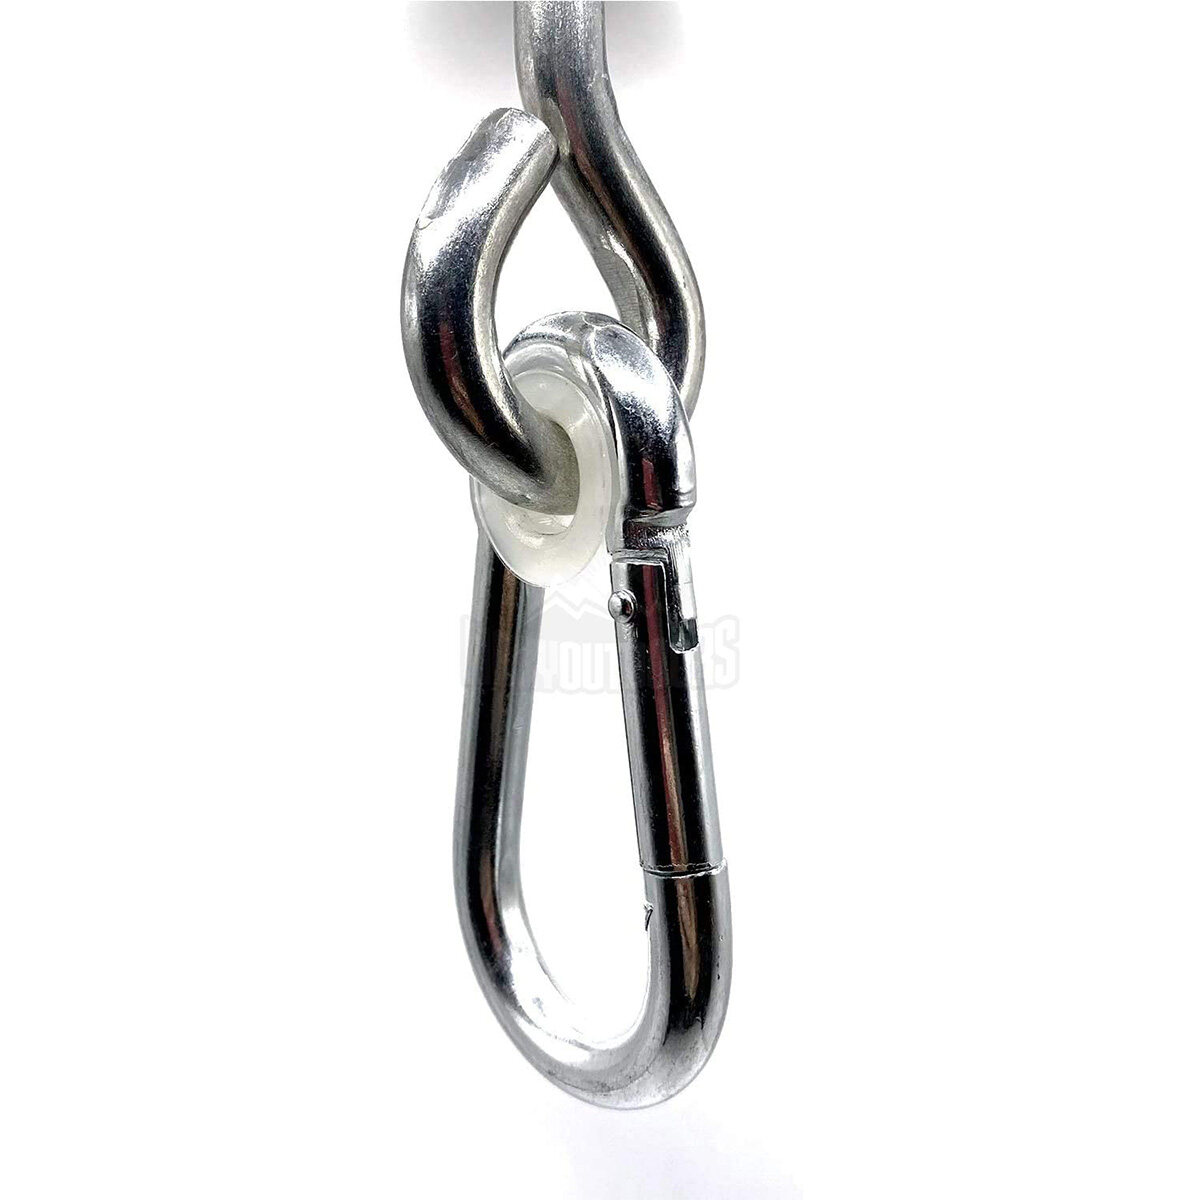 odm swing hook, anchor swivel shackle manufacturers, china anchor shackle